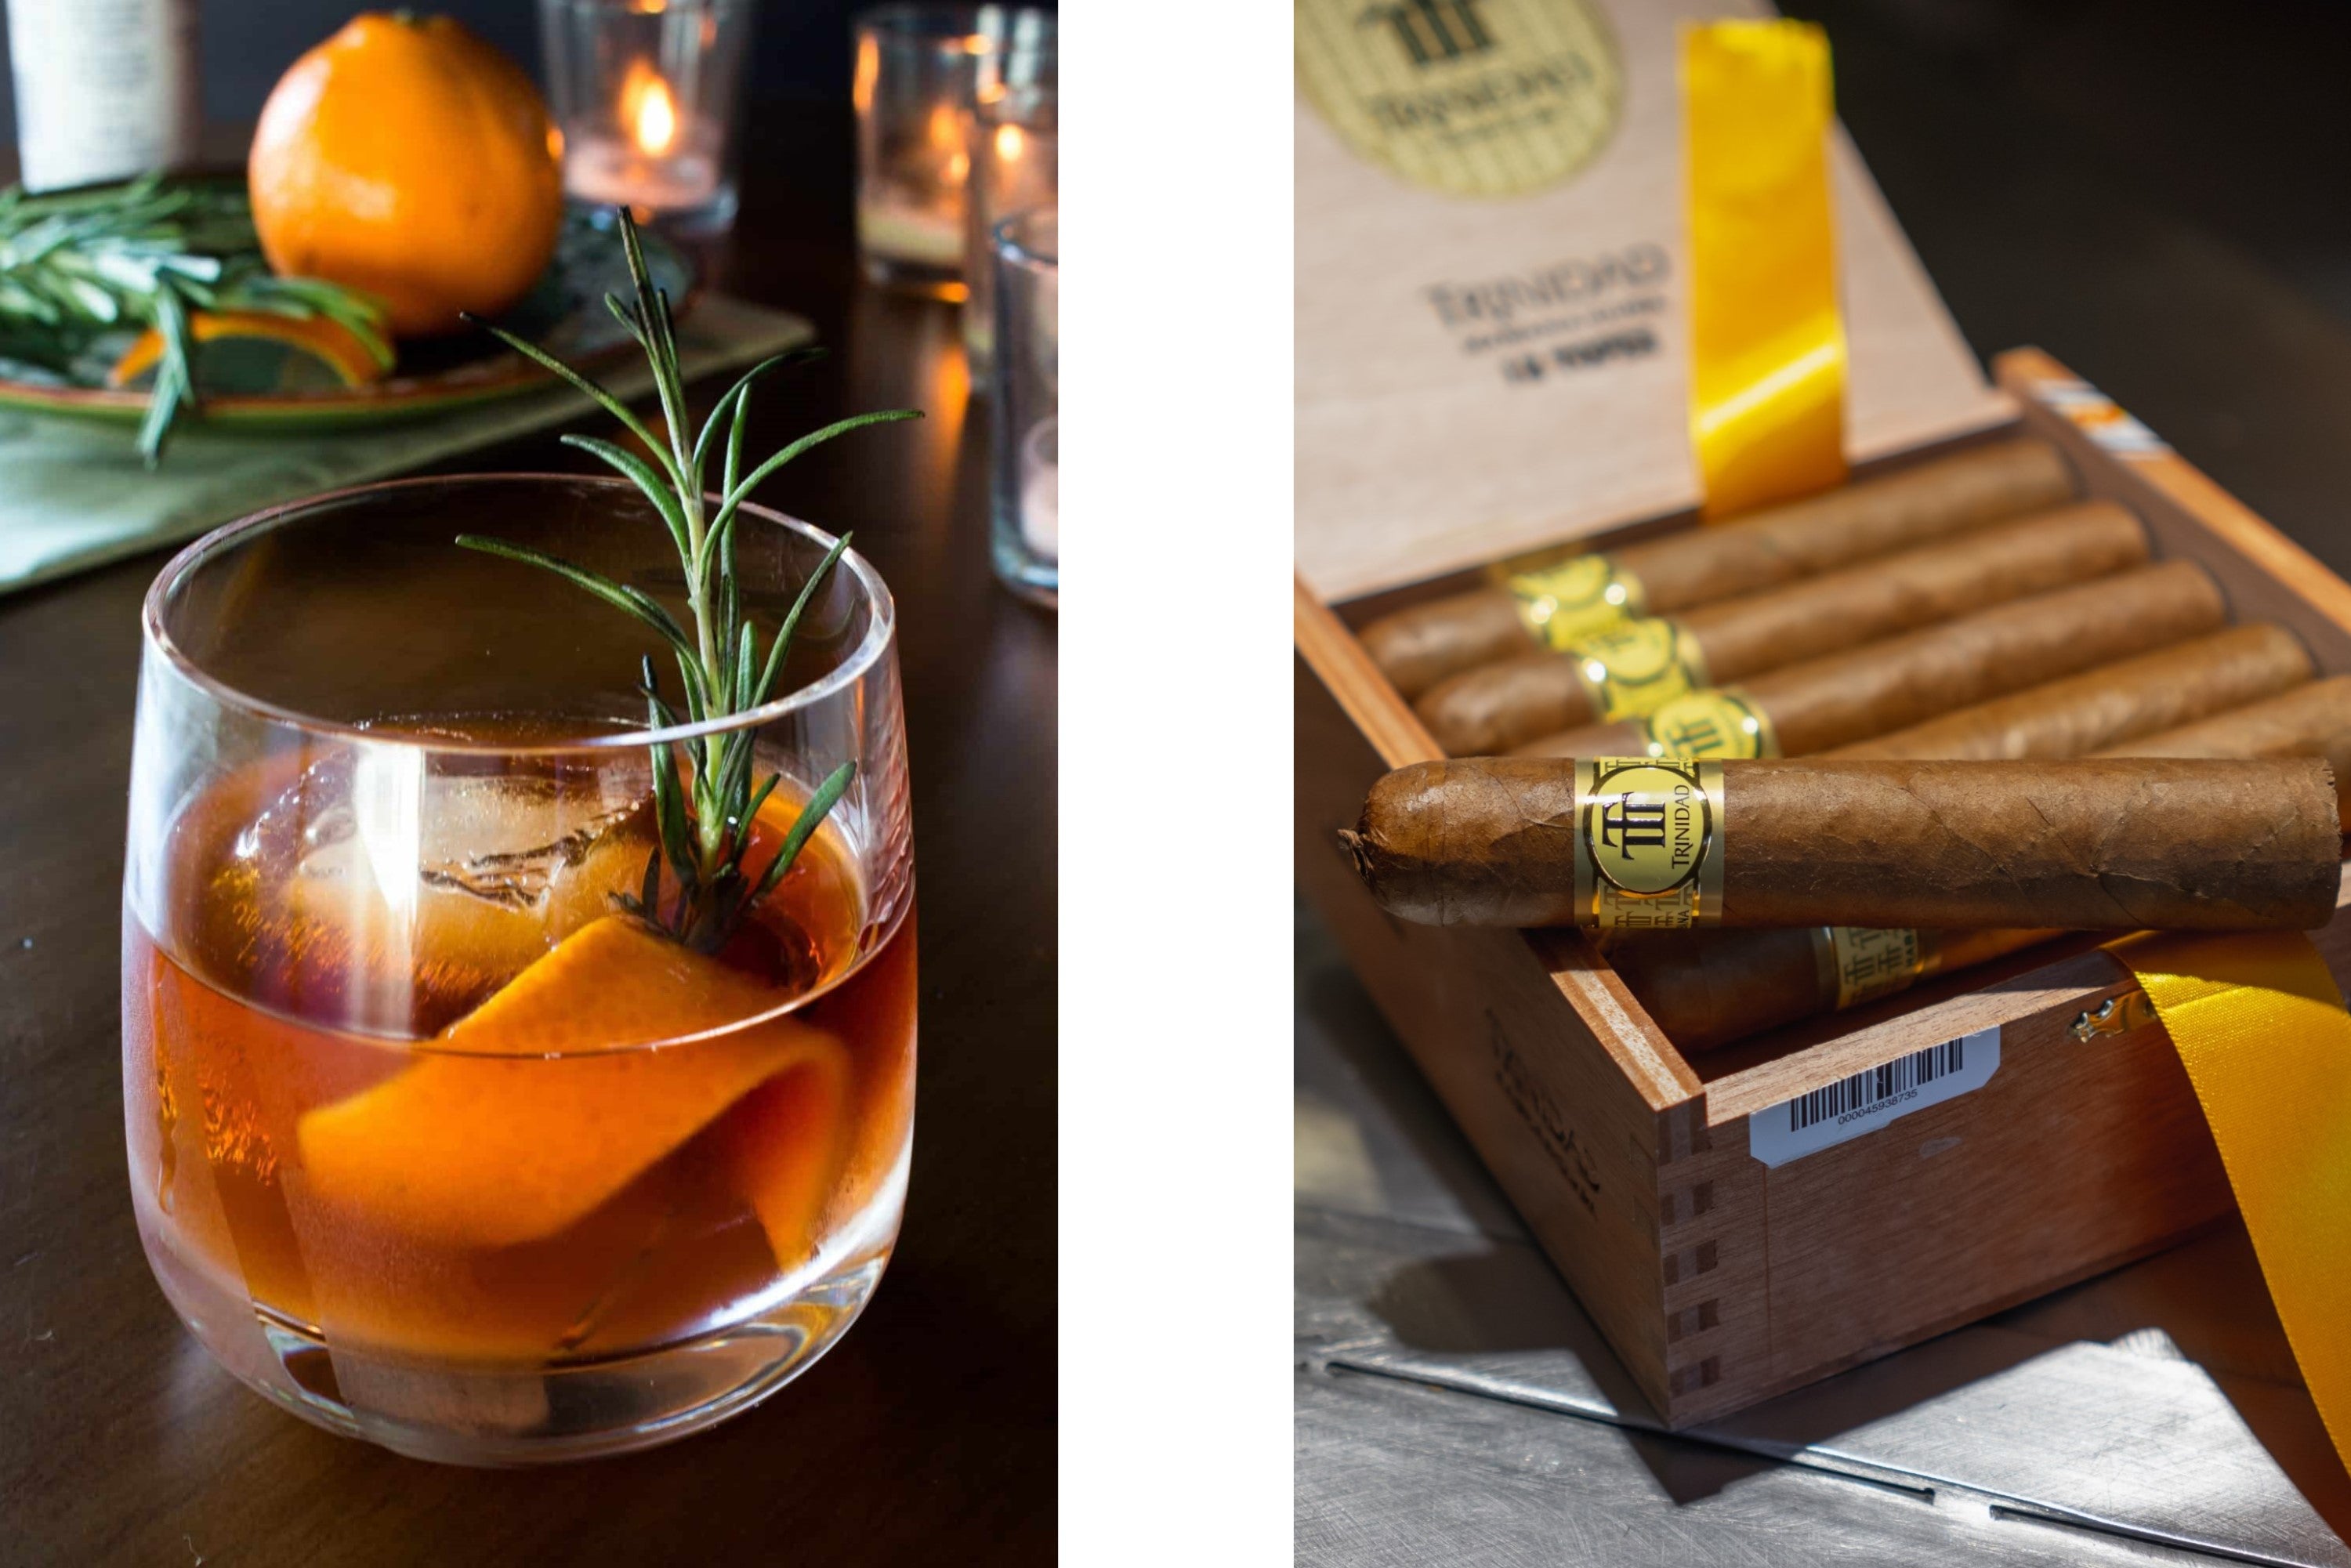 Smoked Old Fashioned with a box of Trinidad Topes